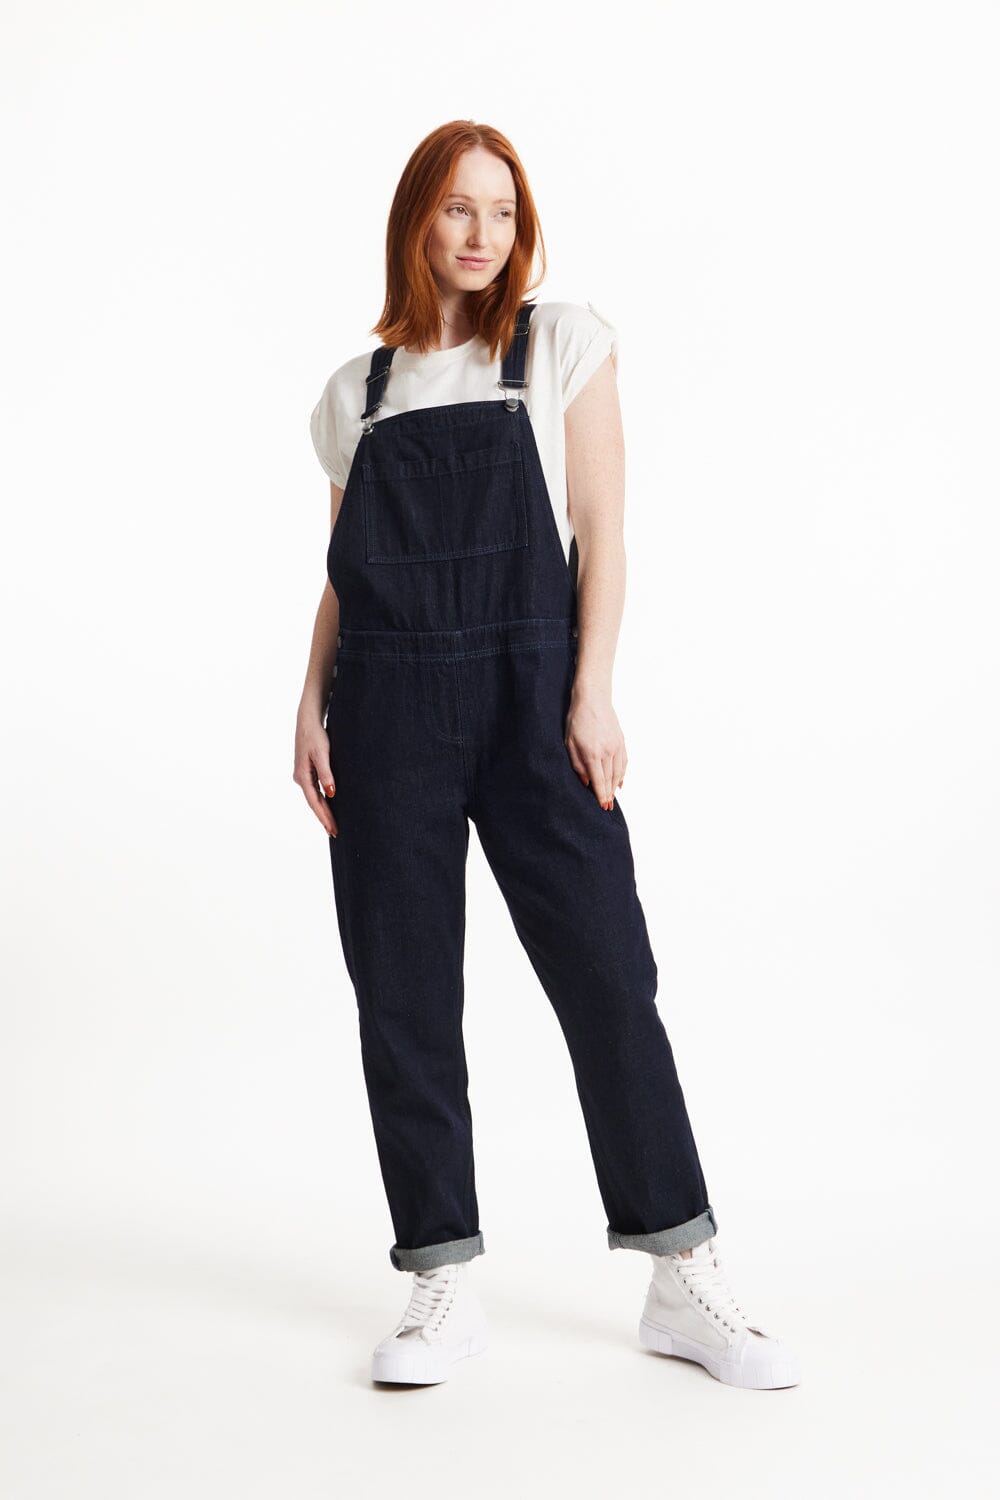 Miss Two Denim dungarees with skirt: for sale at 9.99€ on